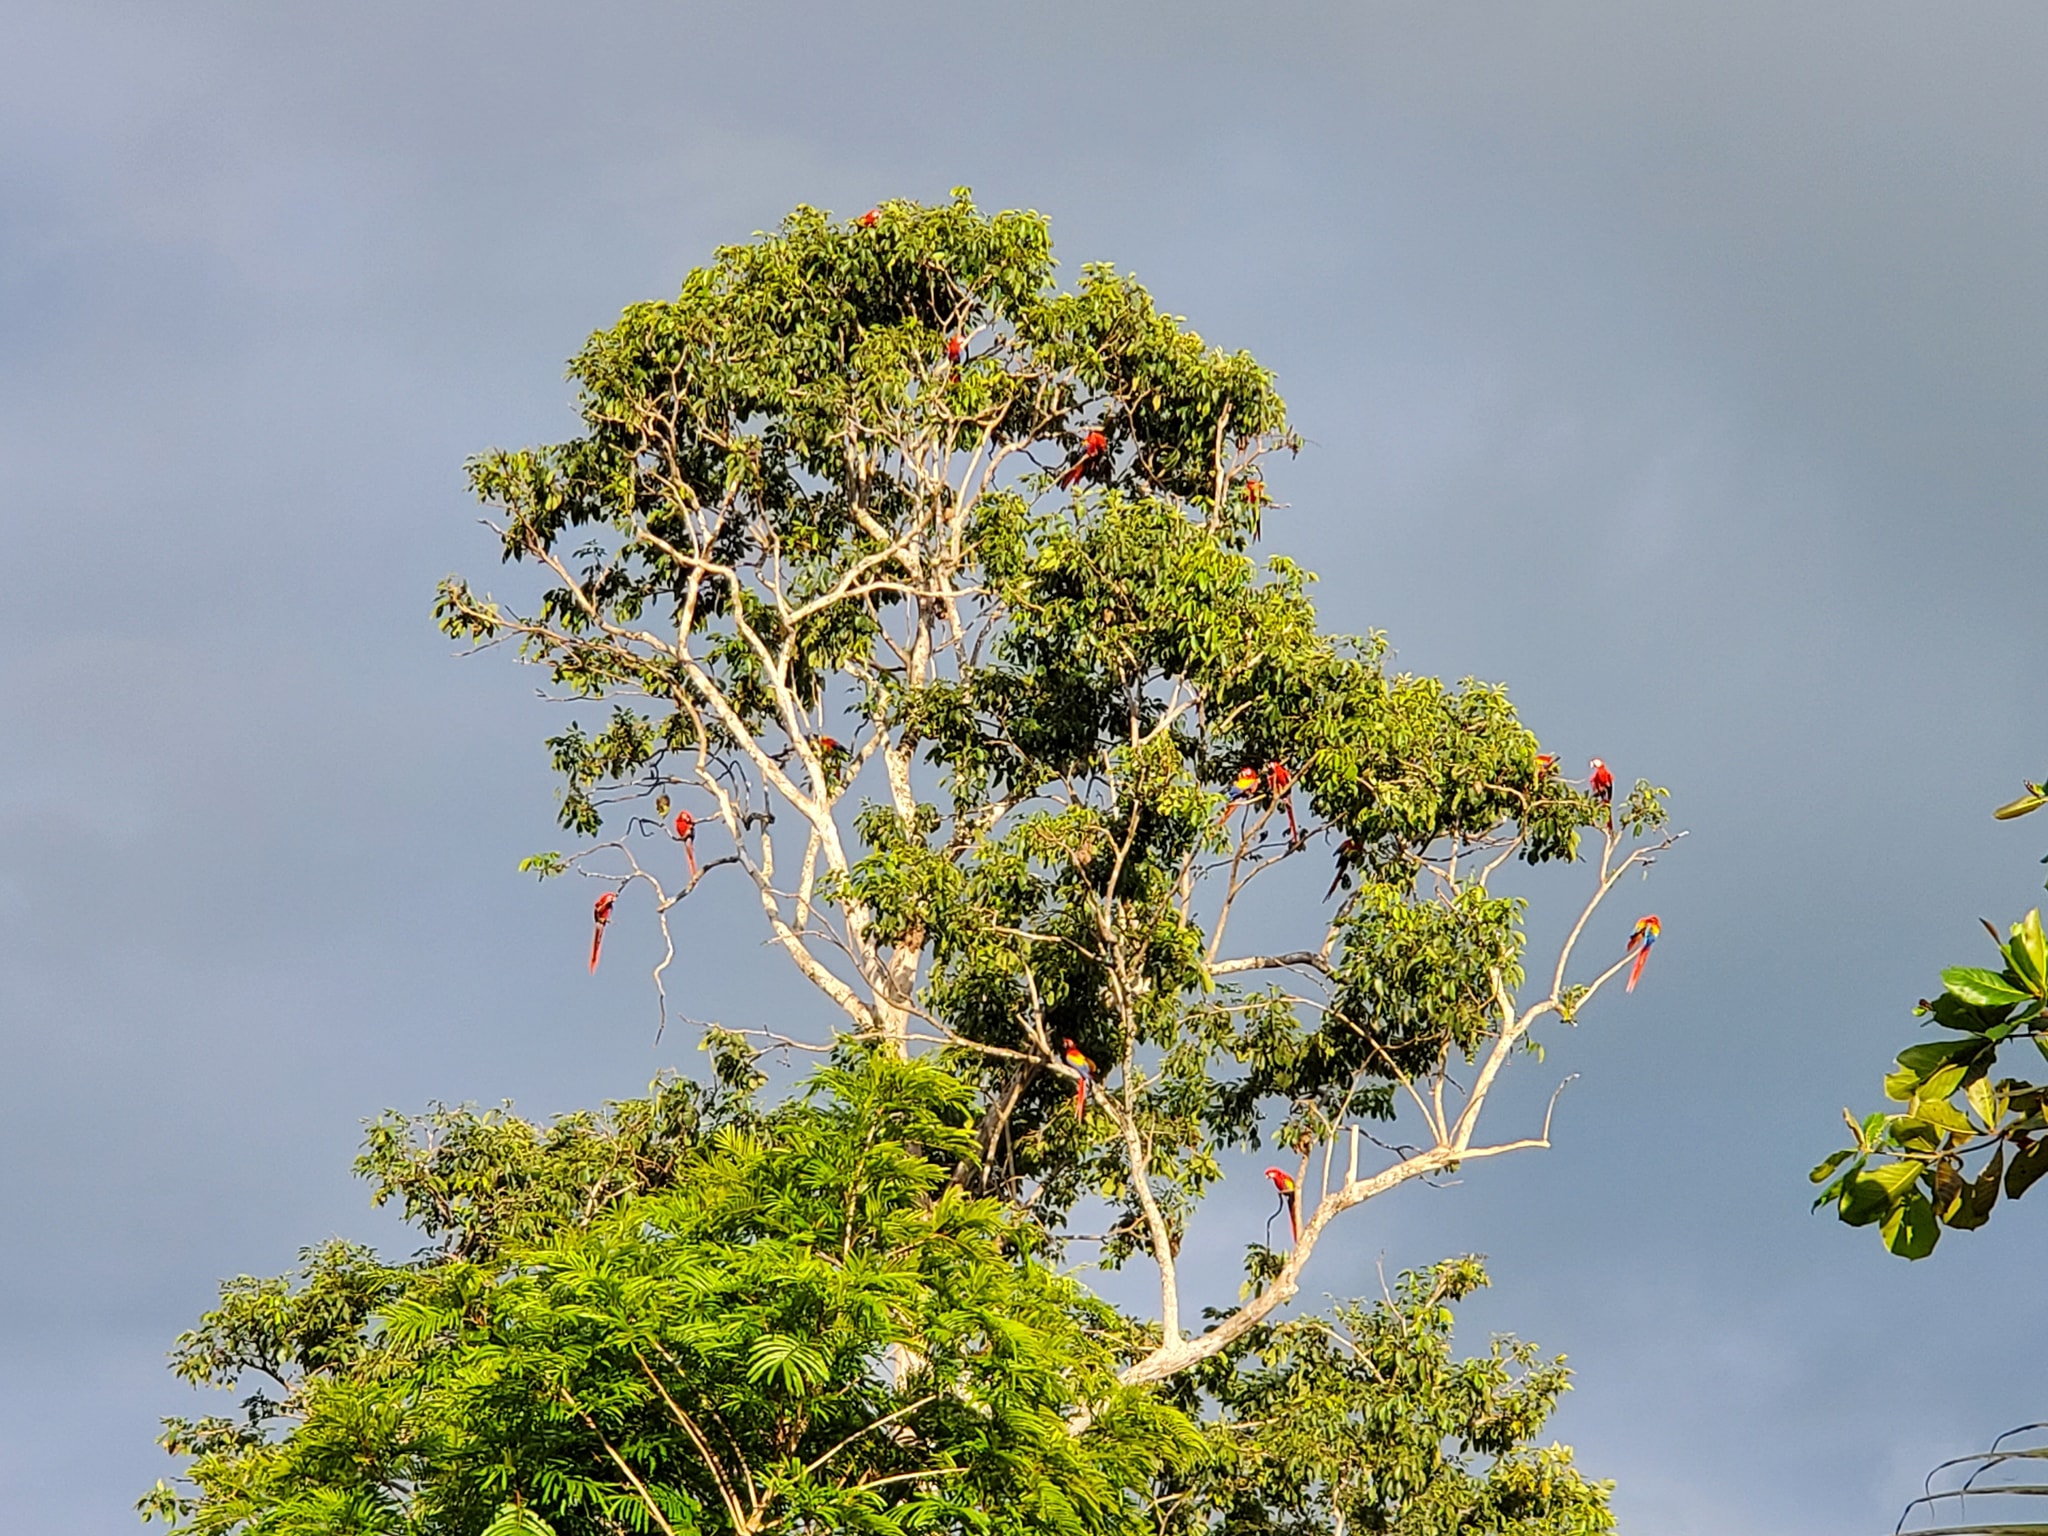 A tree full of macaws